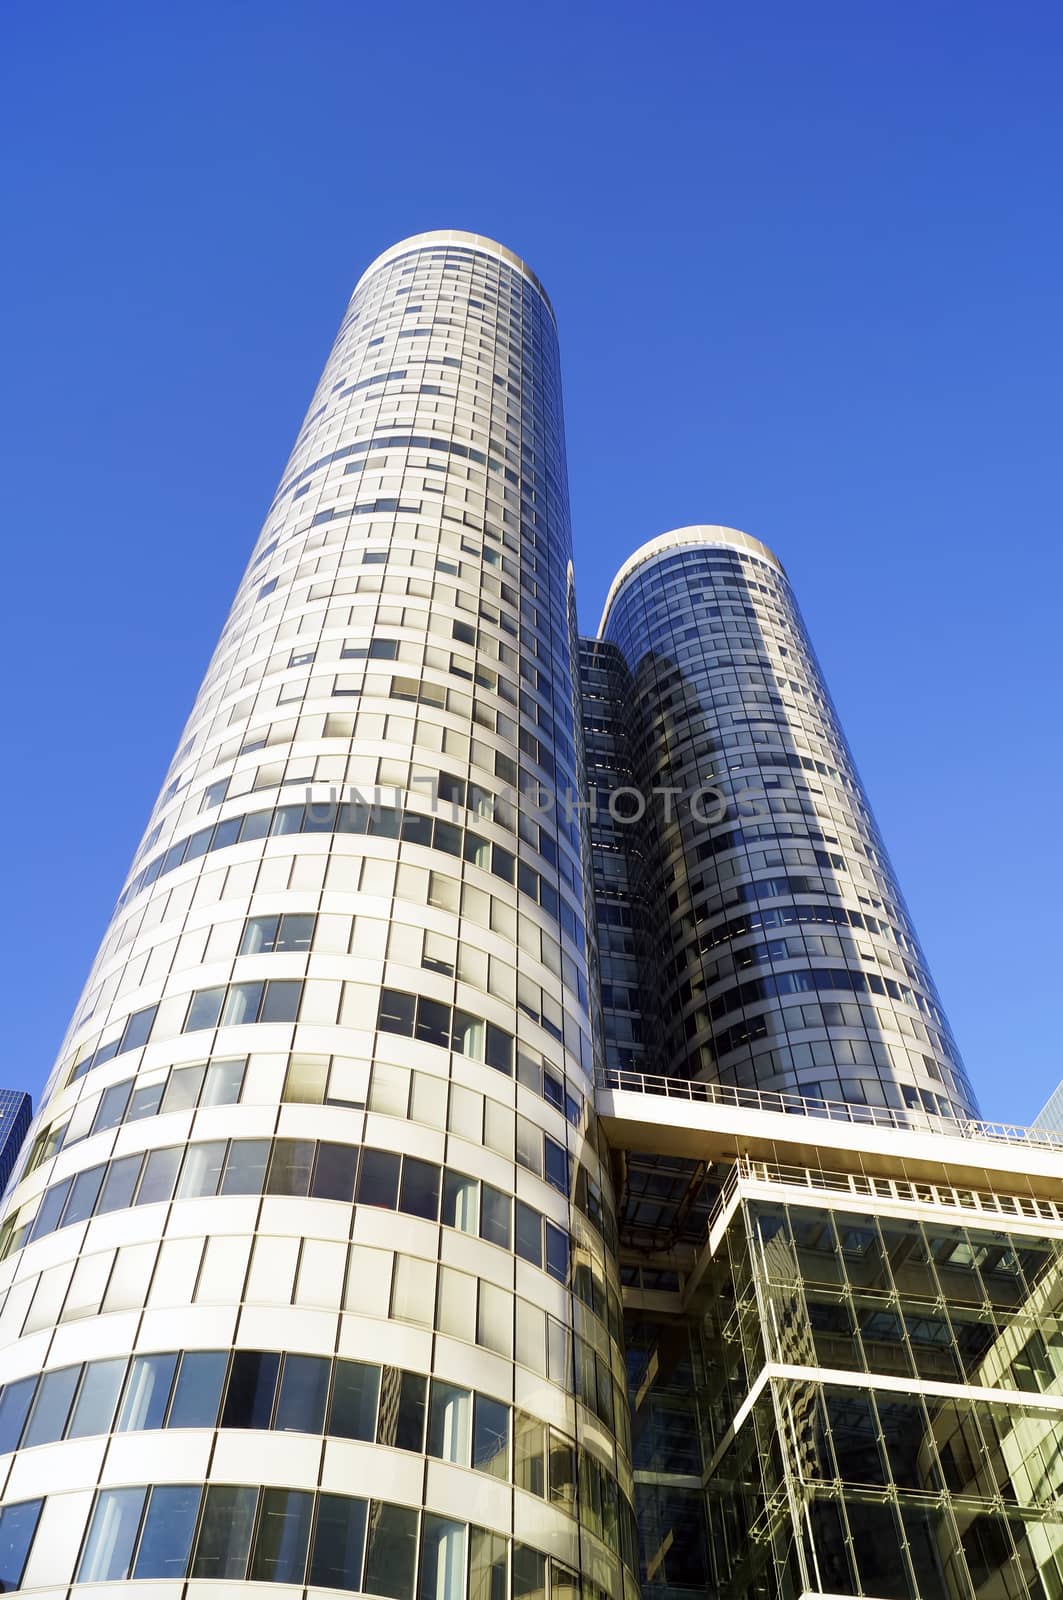 PARIS, FRANCE - SEPTEMBER 29, 2015: Coeur Defense is an office skyscraper in La Defense business district in Paris, France, designed by French architect Jean-Paul Viguier